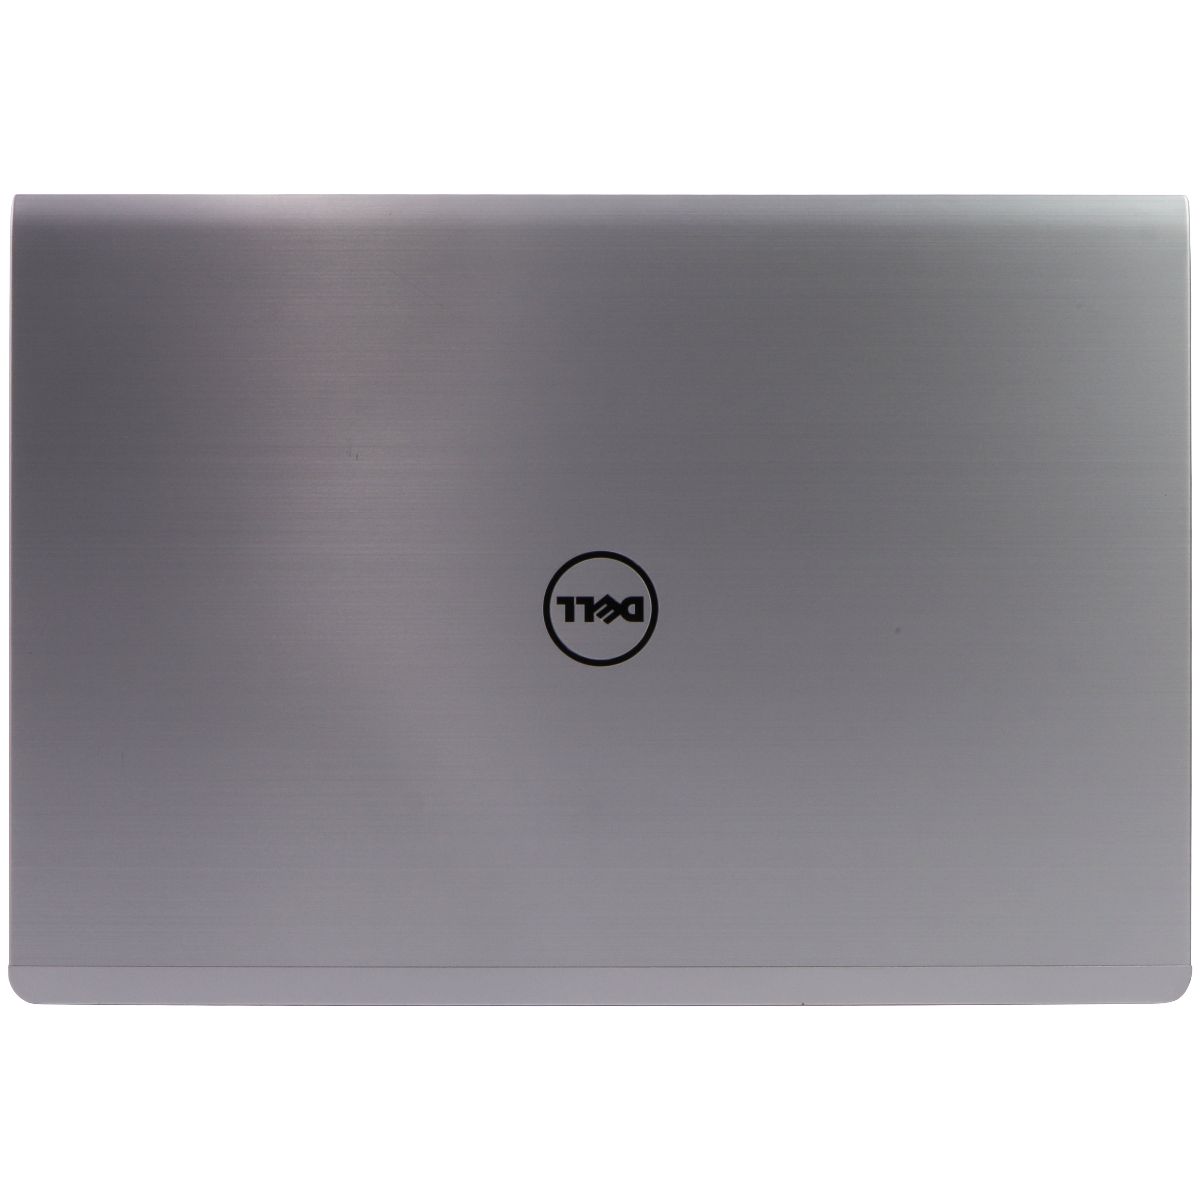 Dell Inspiron 17 5748 (17.3-inch) Laptop (P26E) i3-4030U/500GB HDD/8GB/10 Home Laptops - PC Laptops & Netbooks Dell    - Simple Cell Bulk Wholesale Pricing - USA Seller